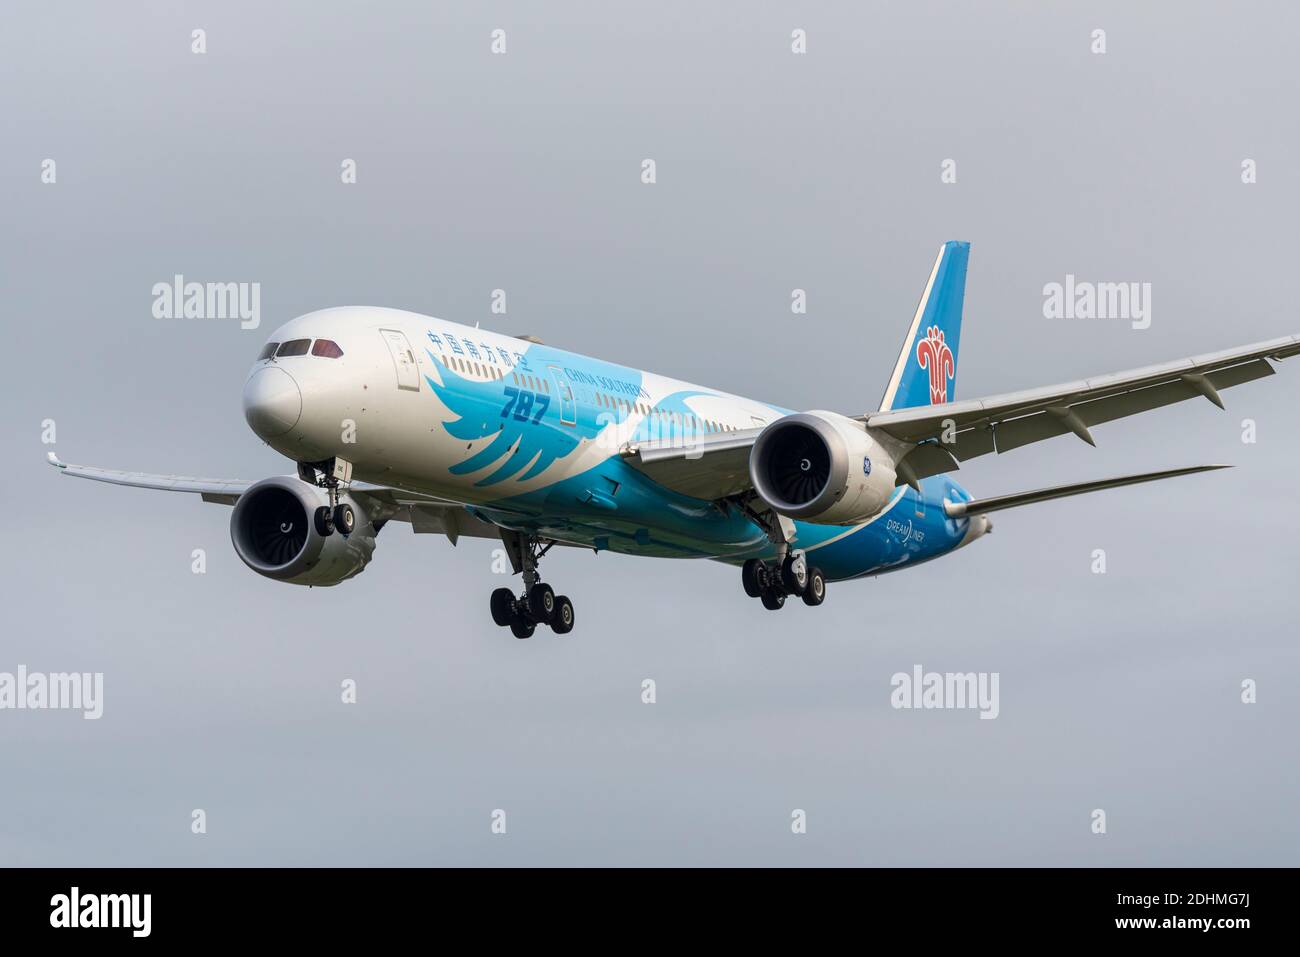 China Southern Airlines Boeing 787 Dreamliner jet airliner plane B-209E landing at London Heathrow Airport, UK. Chinese airline using American plane Stock Photo